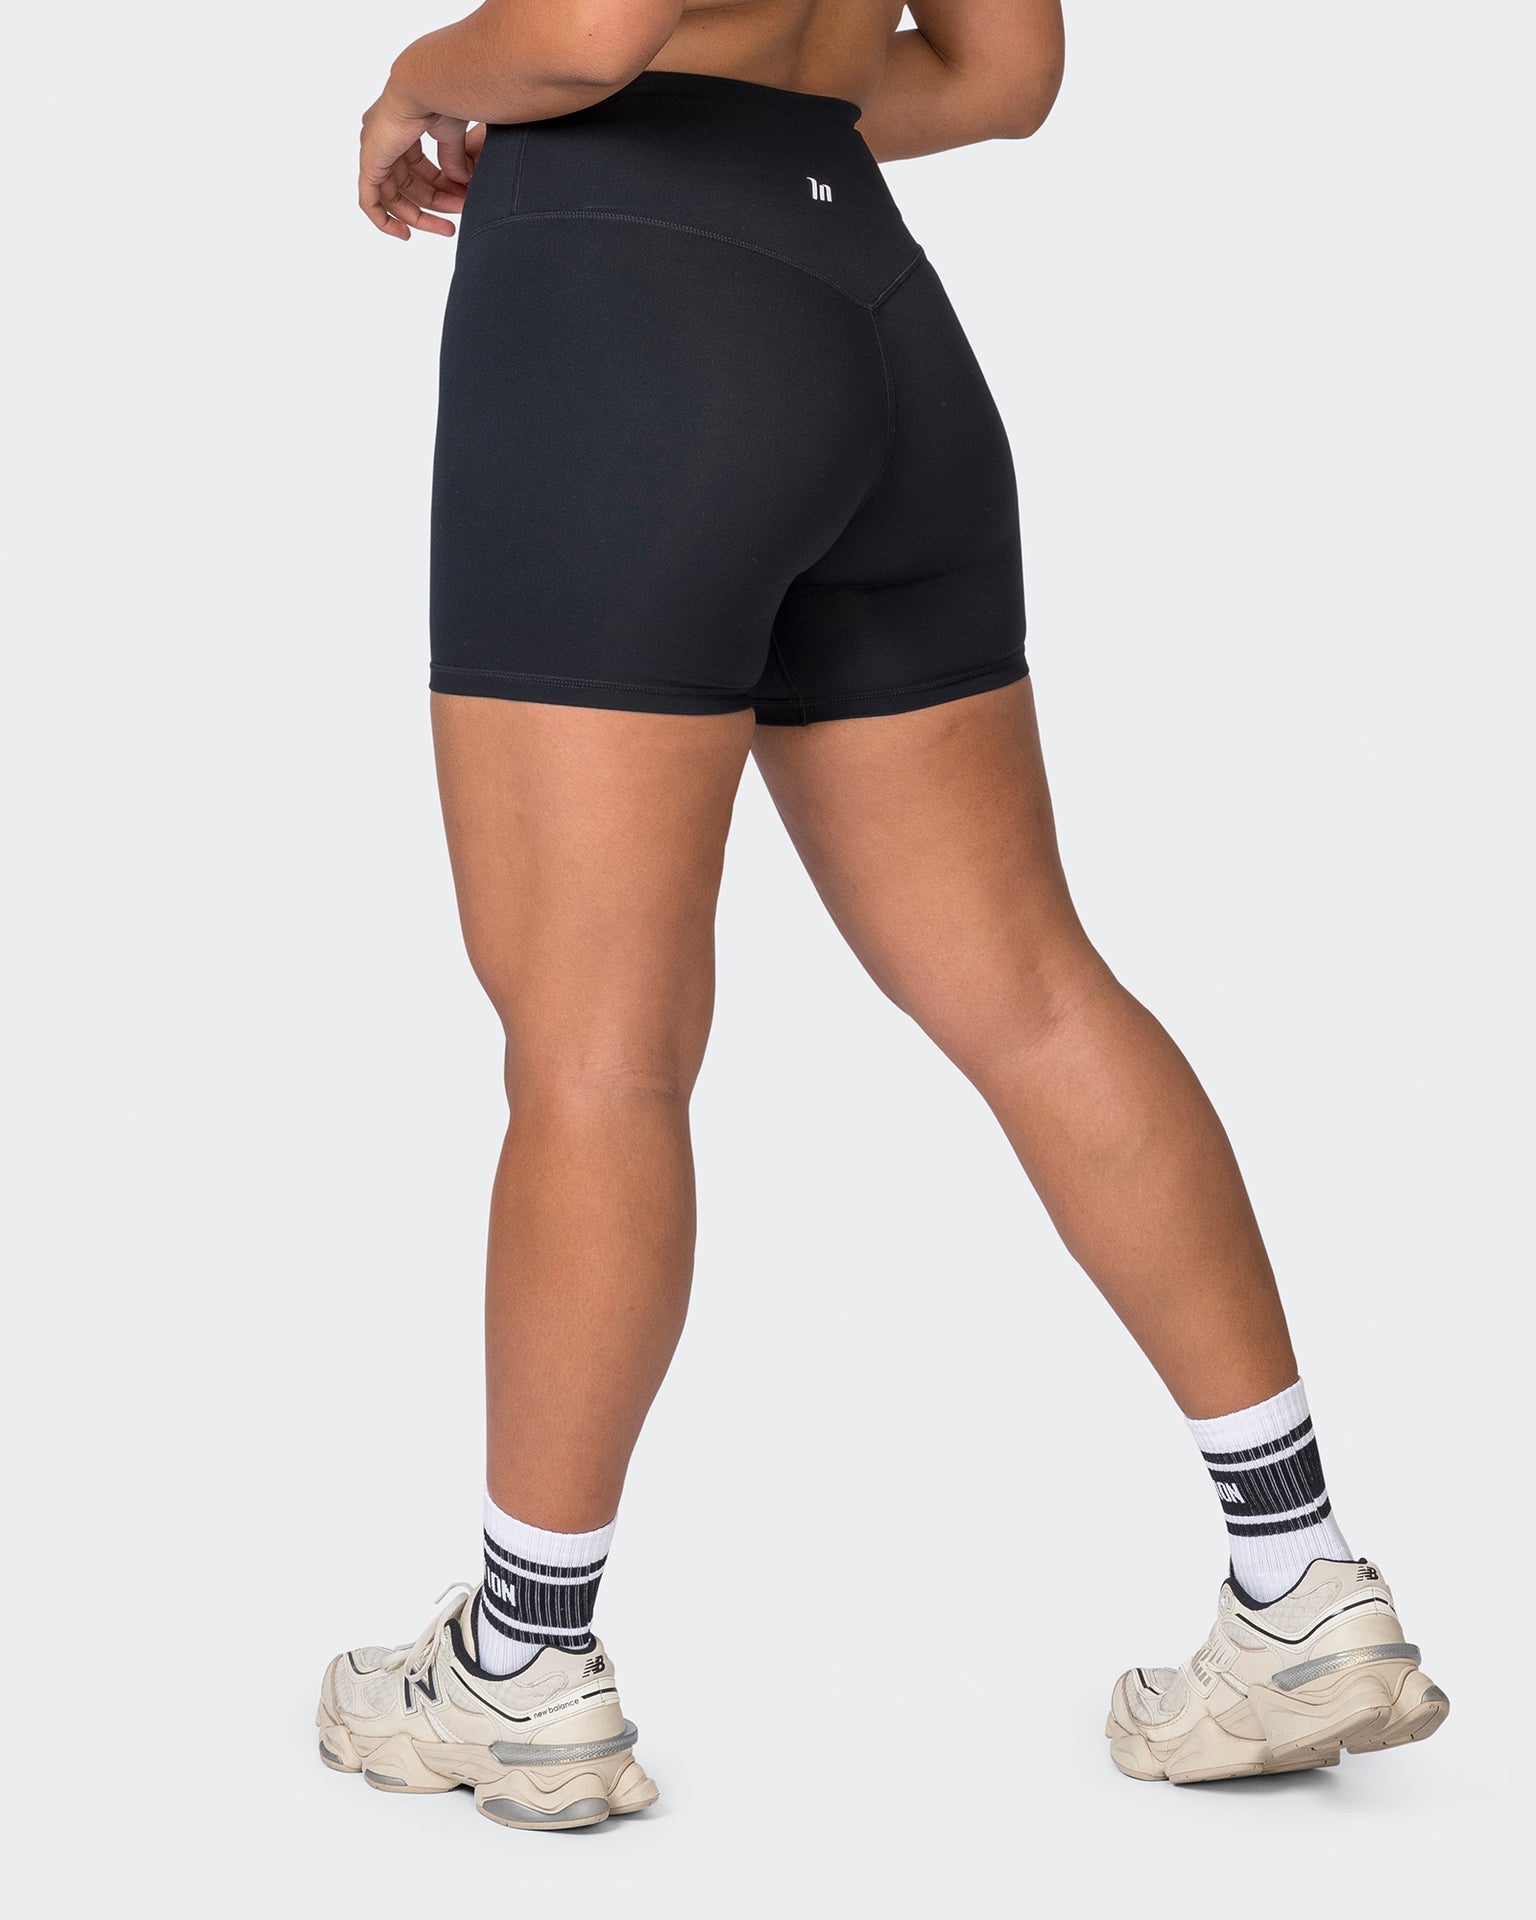 Muscle Nation Shorts Ultra Everyday Midway Shorts - Black